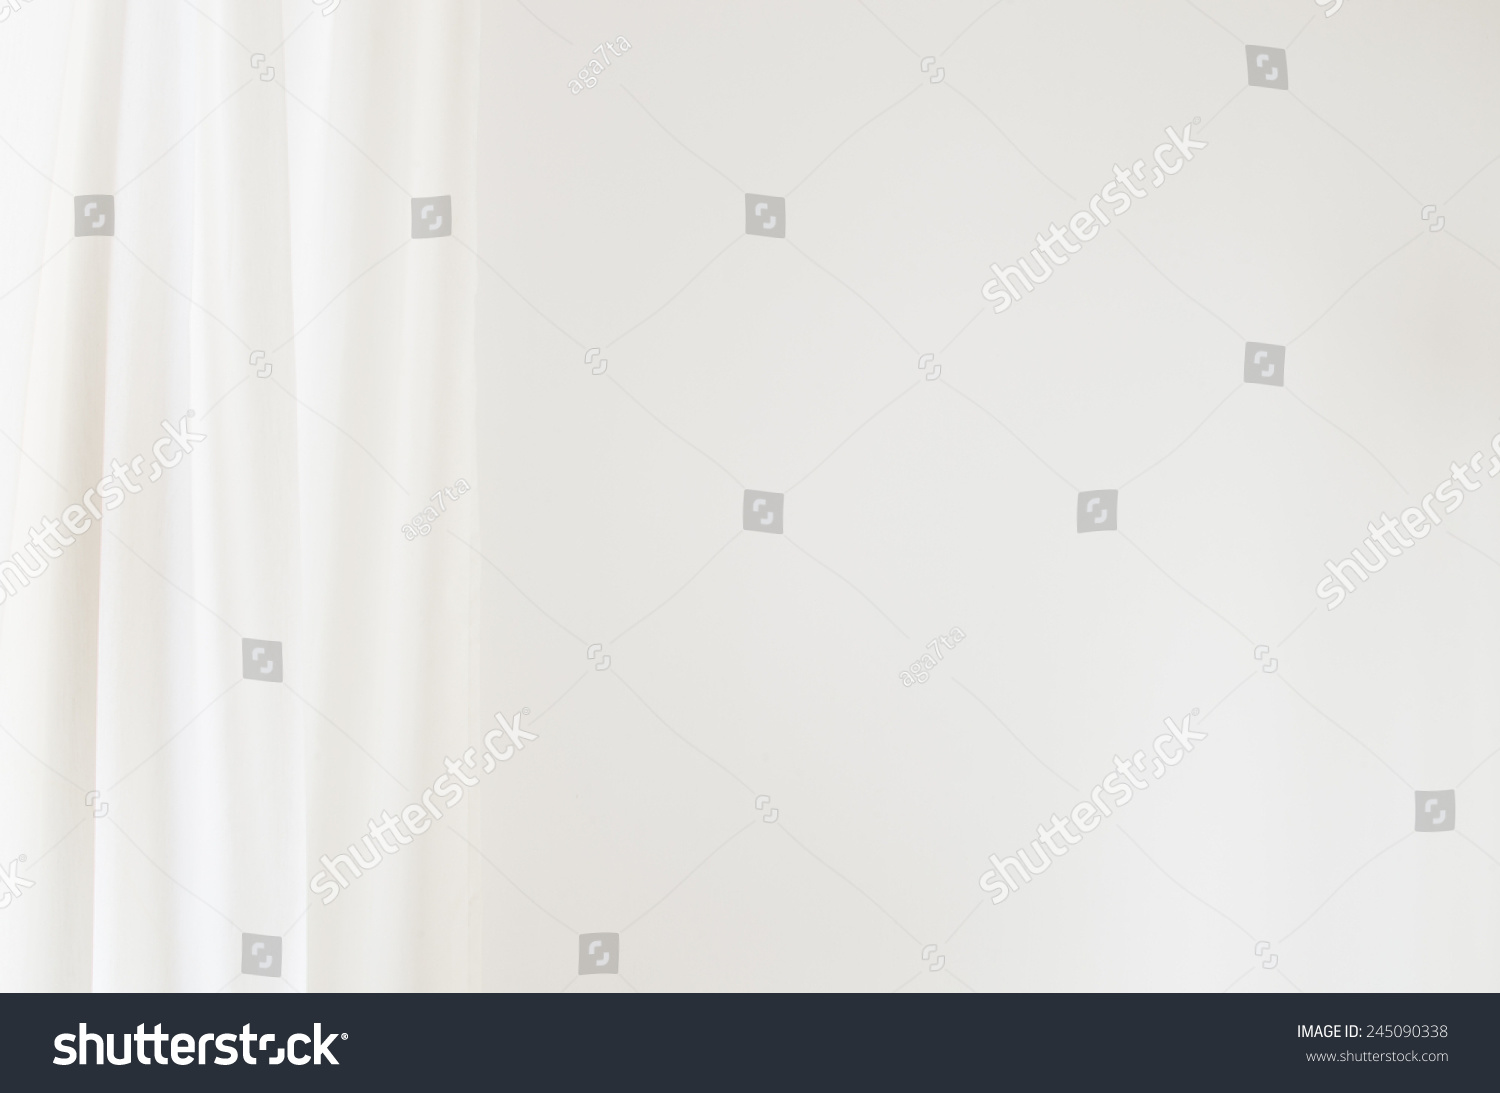 White Curtain On White Wall Background Stock Photo 245090338 - Shutterstock